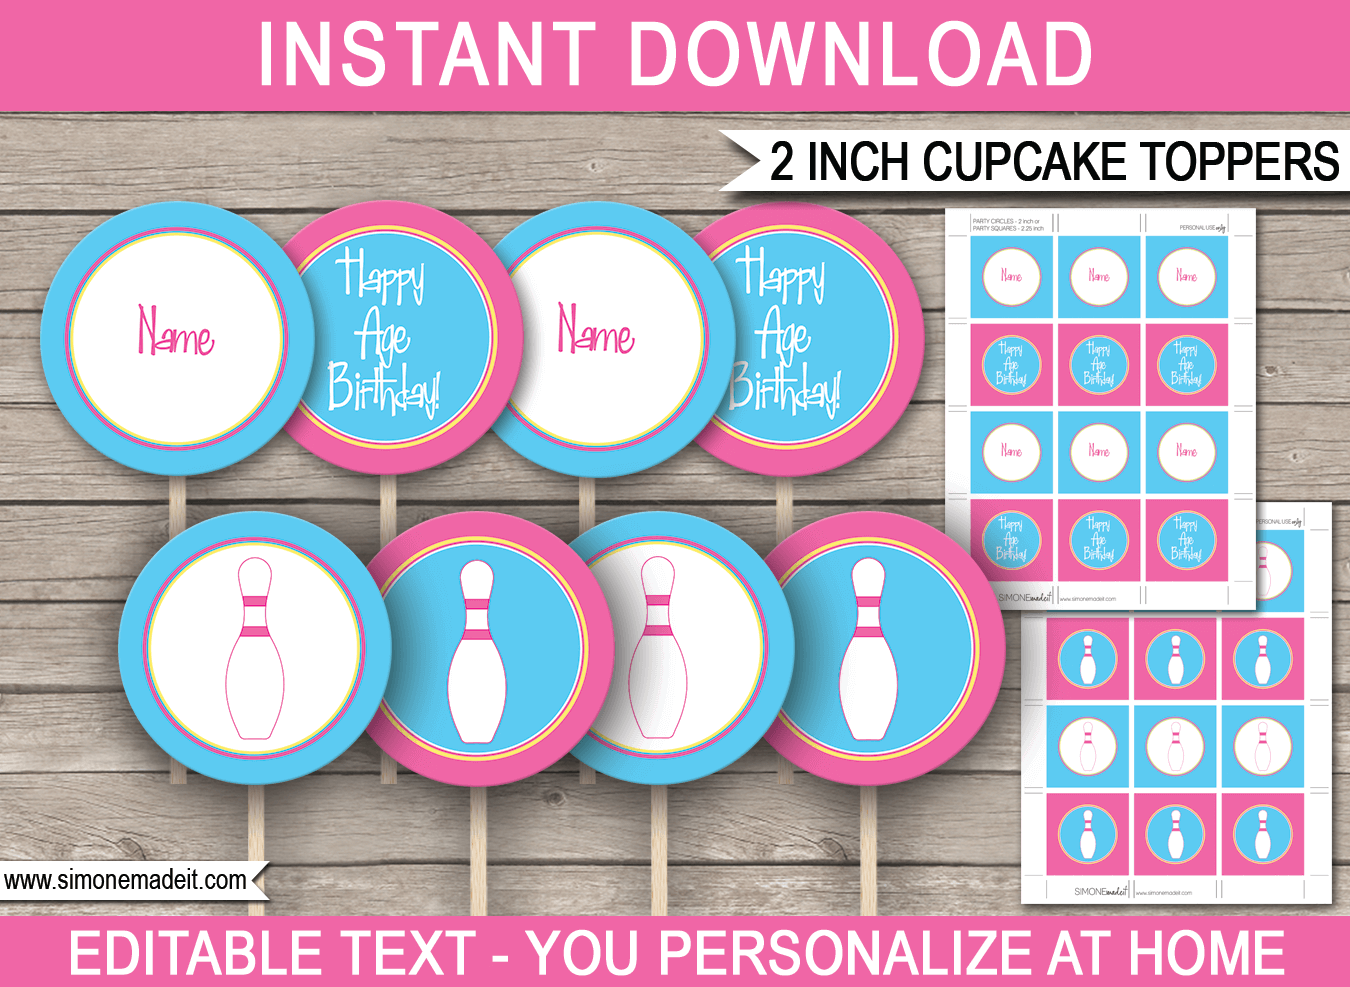 Printable Pink Bowling Birthday Party Cupcake Toppers | 2 inch | Gift Tags | DIY Editable & Printable Template | INSTANT DOWNLOAD via simonemadeit.com